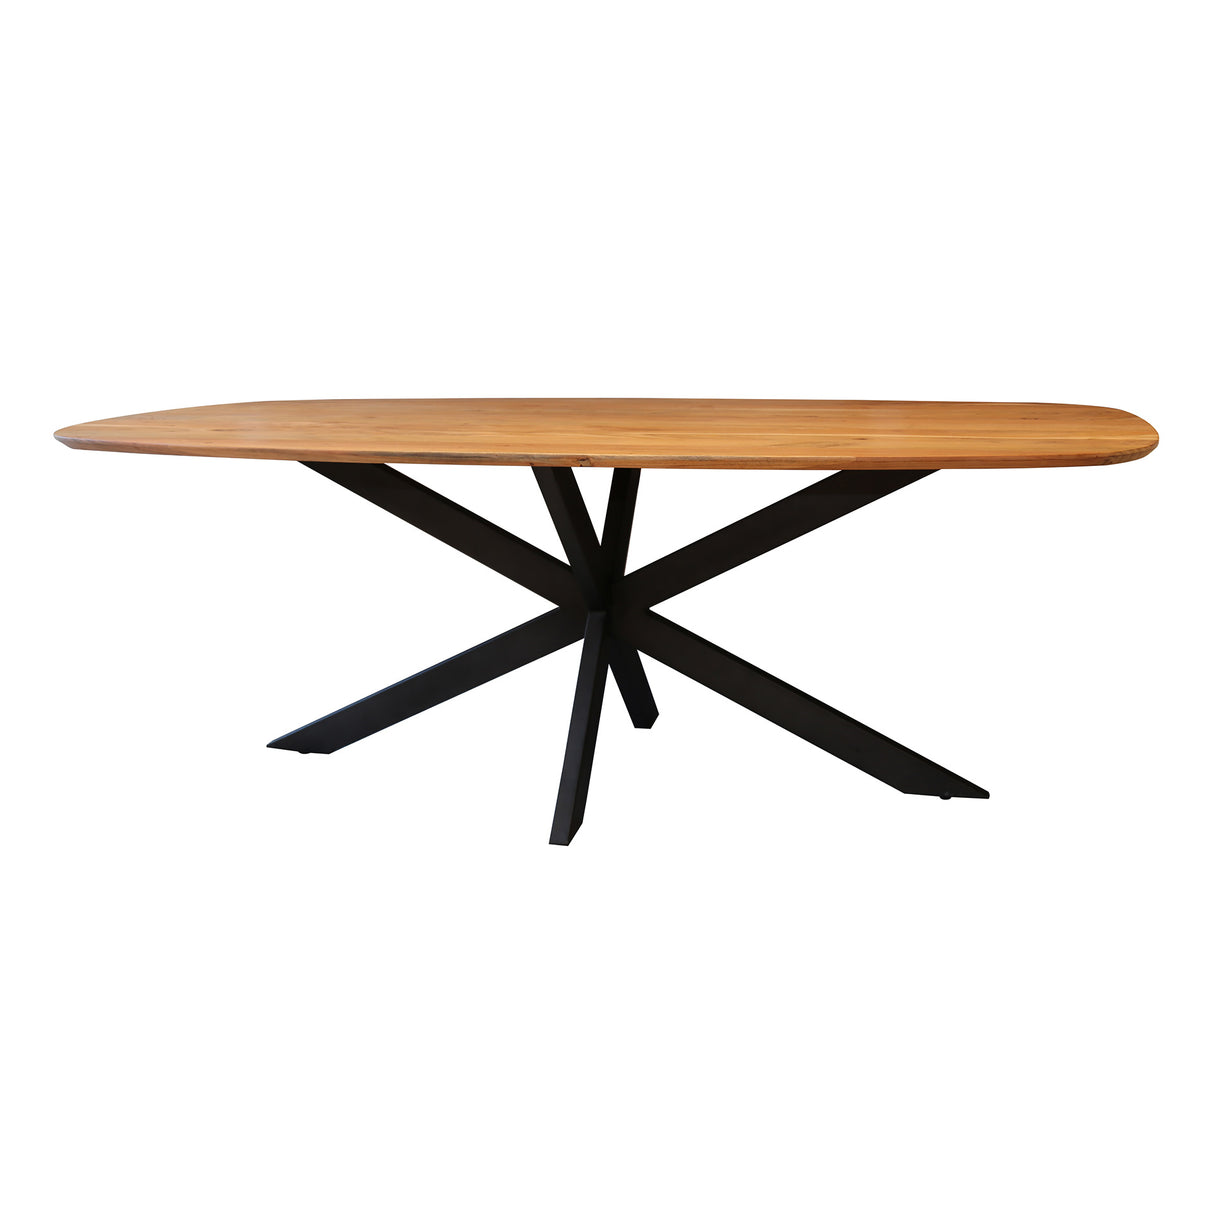 Dining table Laurie Danish oval acacia wood 180 cm